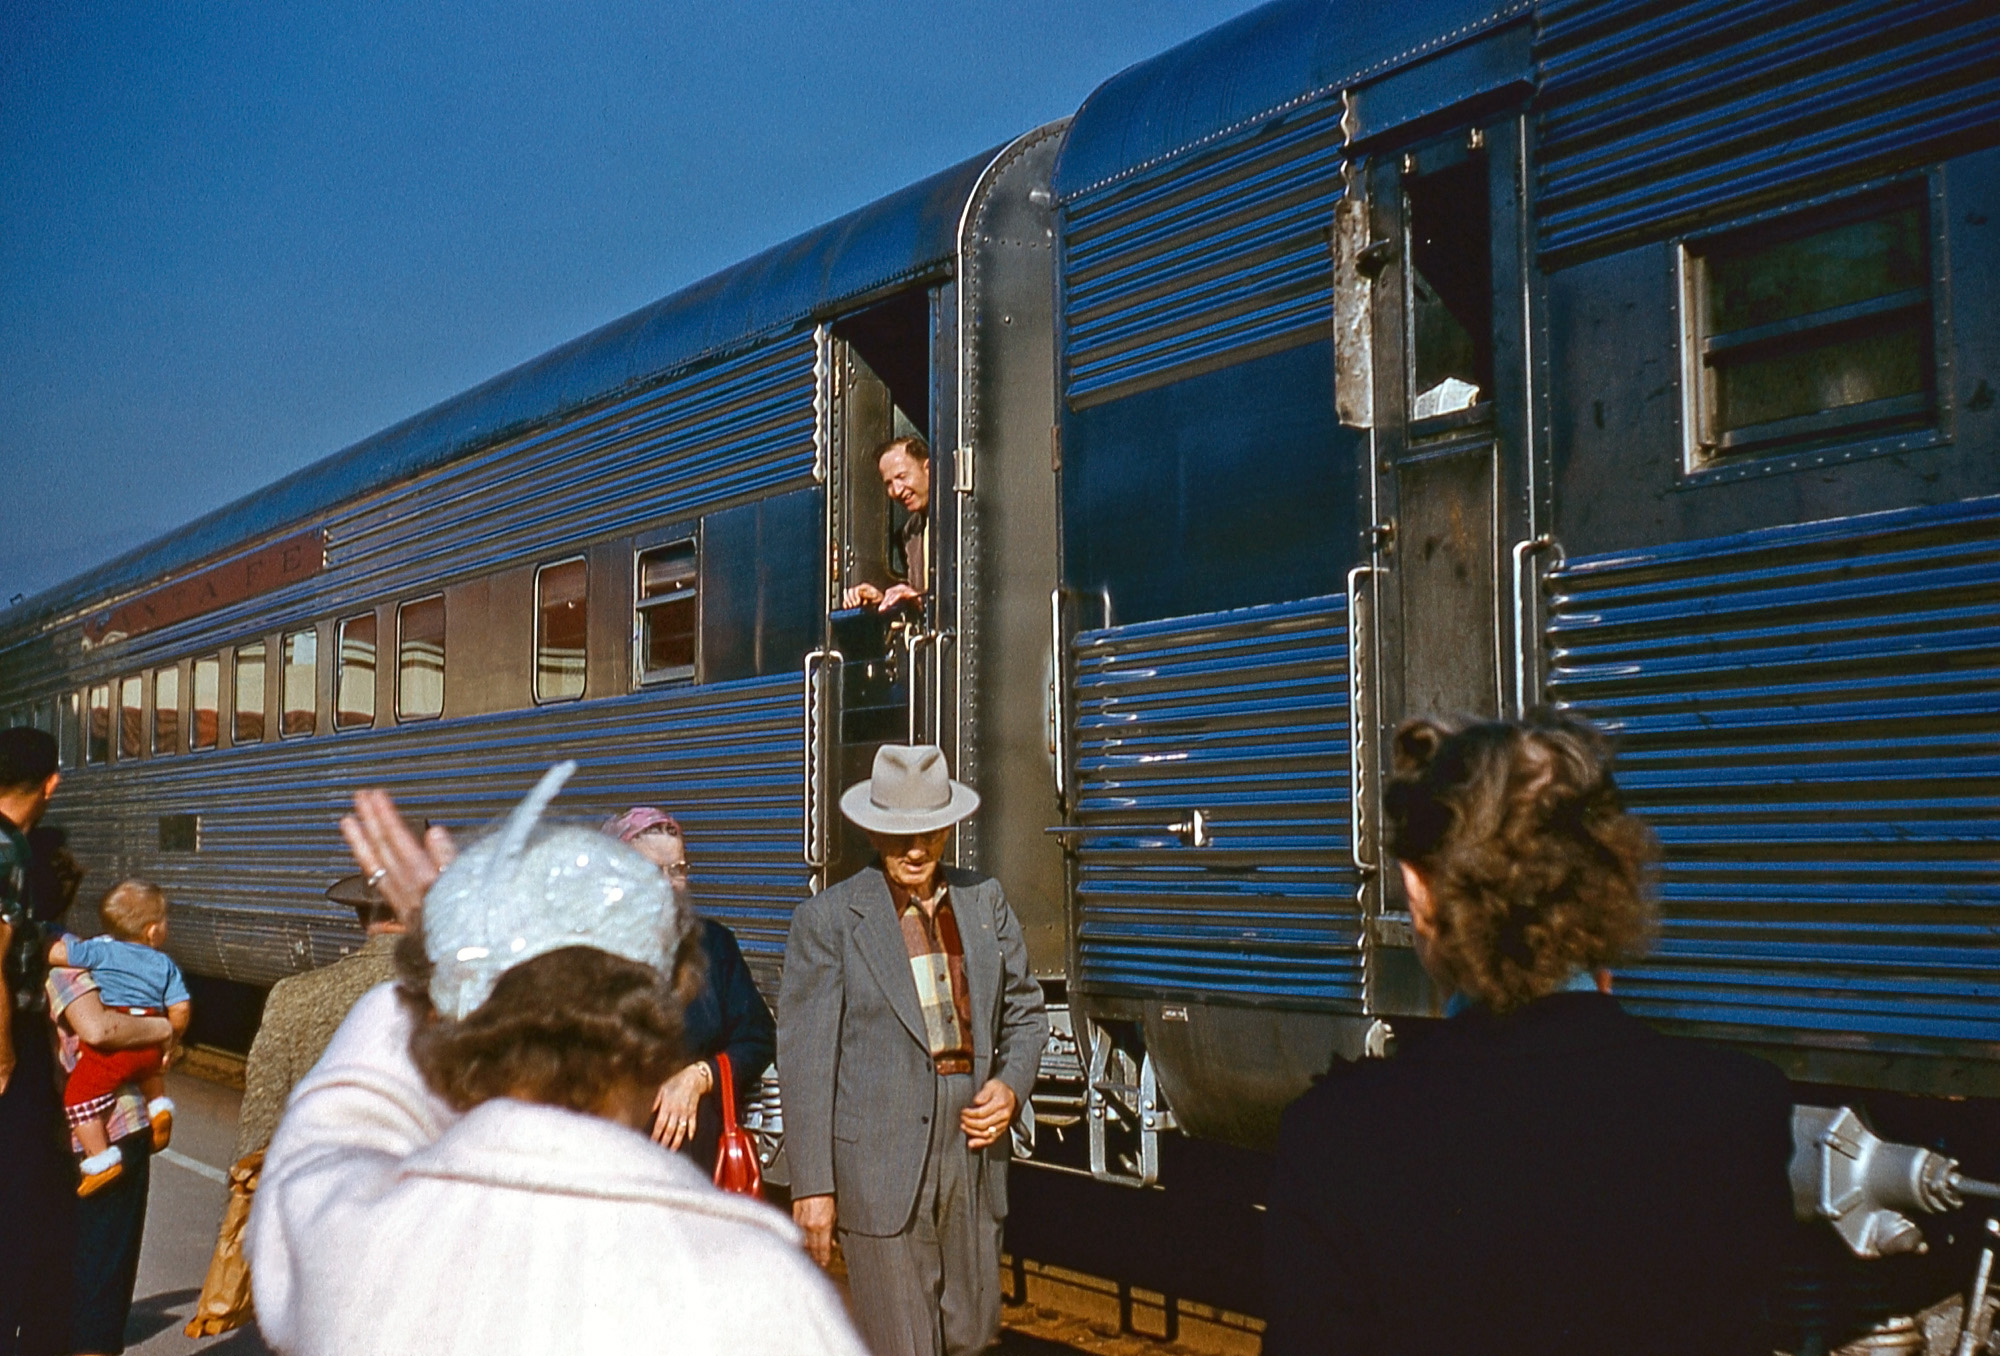 Found Kodachrome slide from December 1955, possibly the Pasadena train station. View full size.